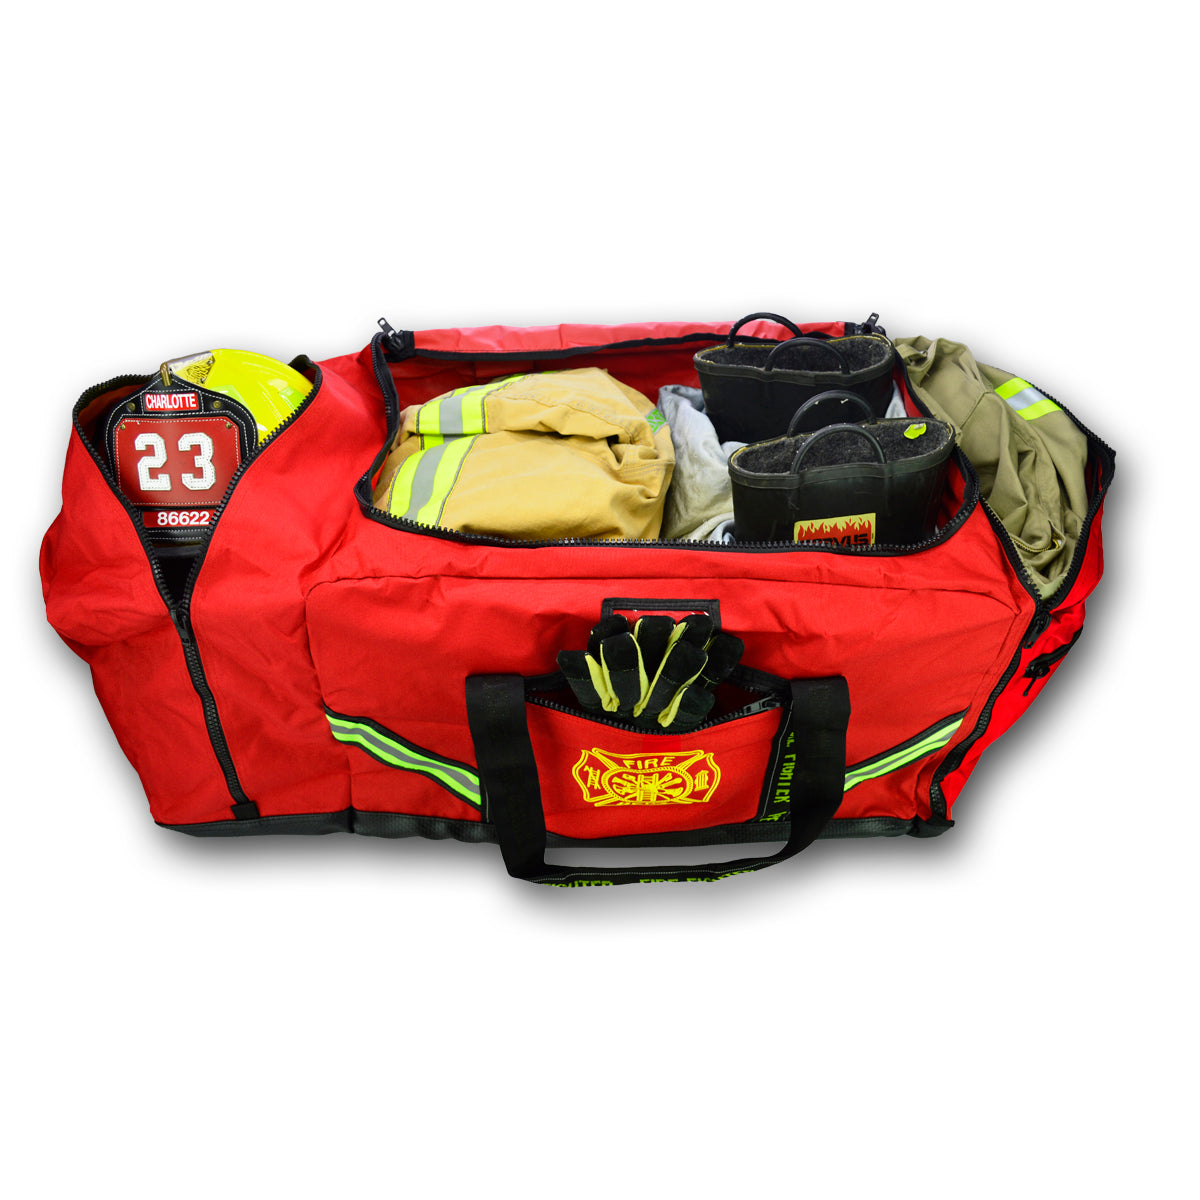 Lightning X Premium 3XL Turnout Gear Bag (LXFB10) | Fire Store | Fuego Fire Center | Firefighter Gear | The Nomex and Kevlar in your turnout gear is highly sensitive to the sun. In fact, ultra-violet rays break down the very material that makes the fabric fire resistant in the first place. Keeping your gear clean and storing it in a turnout bag are the two most important factors for extending the life of your department's investment.